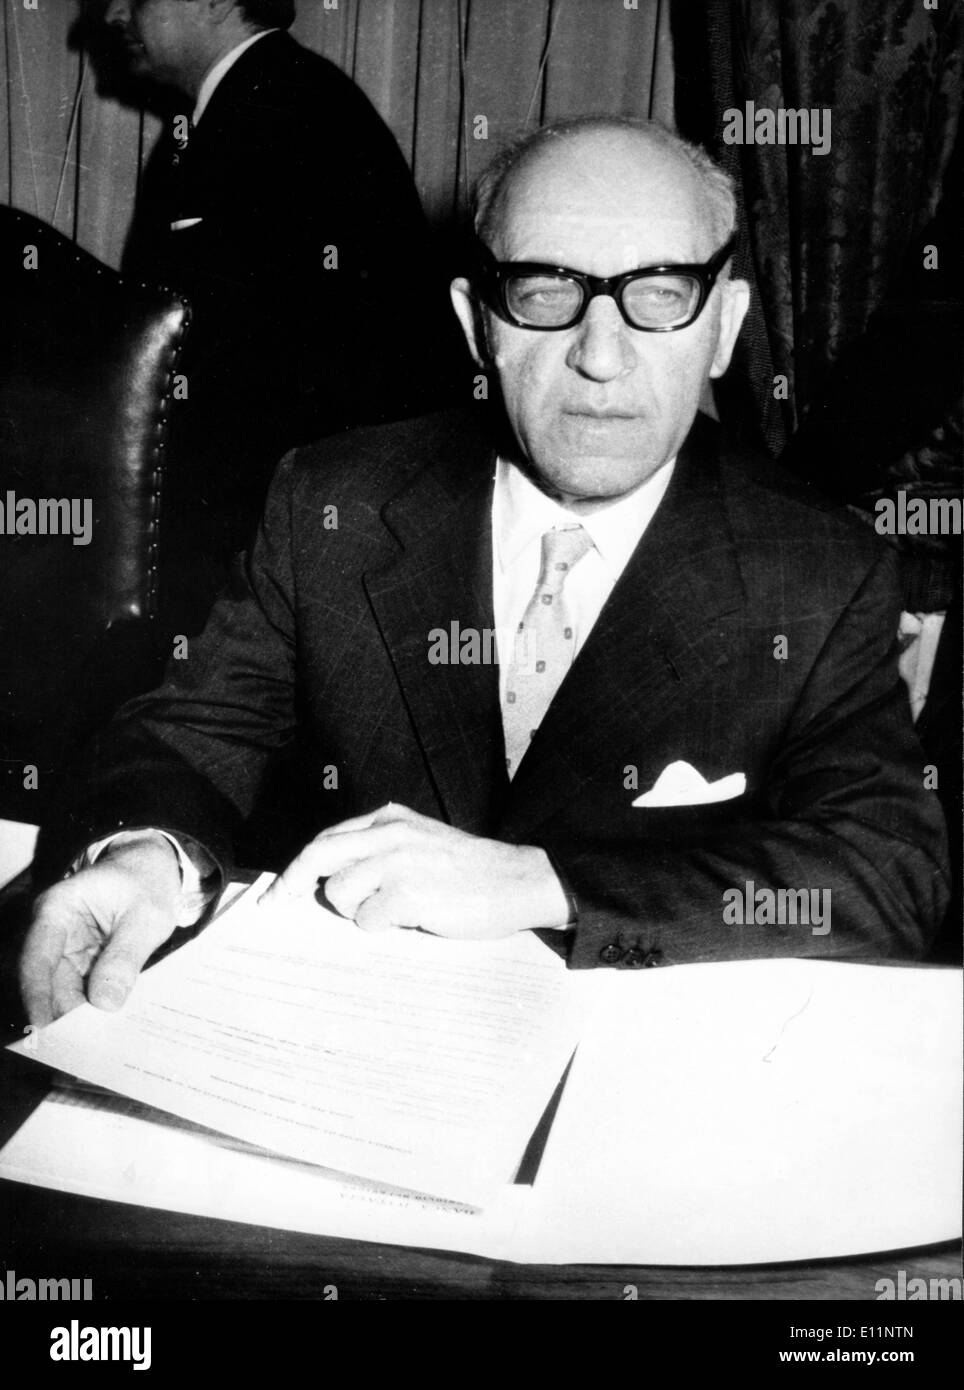 Apr 11, 1979; Rome, Italy; Portrait of the governor of the Bank of Italy, the greatest italian financial institut, PAOLO BAFFI. Stock Photo